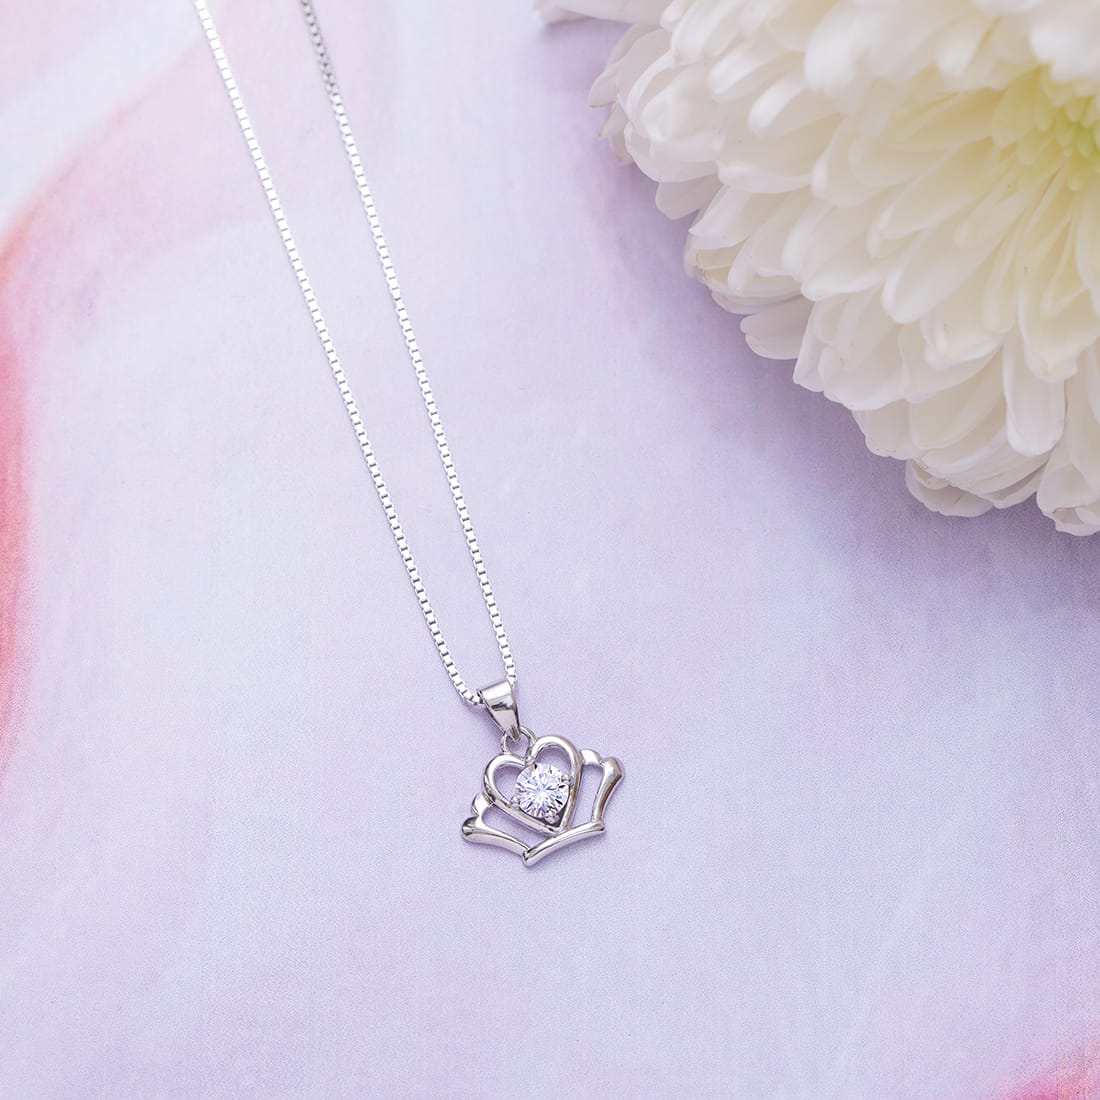 Tiara CZ 925 Sterling Silver Pendant with Chain